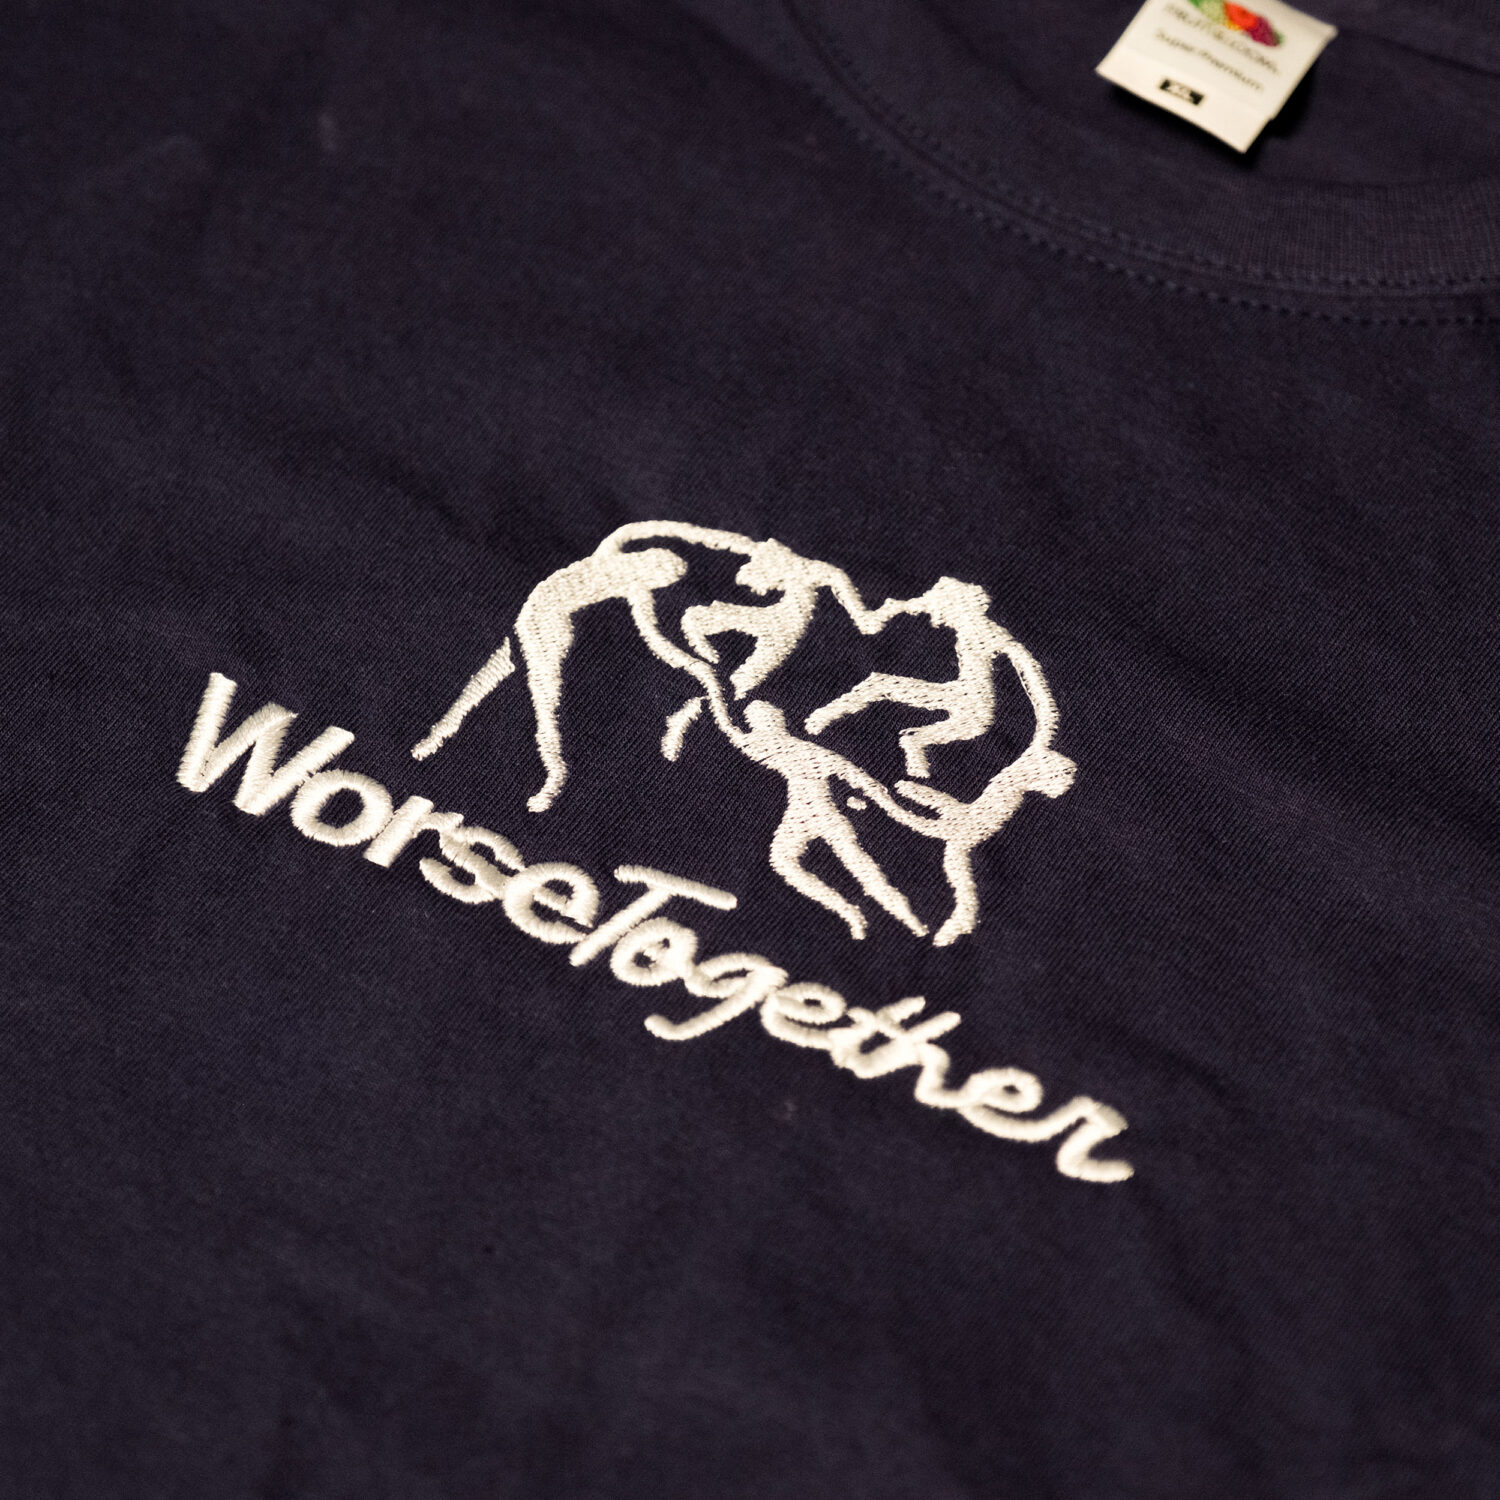 Worse Together Embroidered Unisex T-Shirt